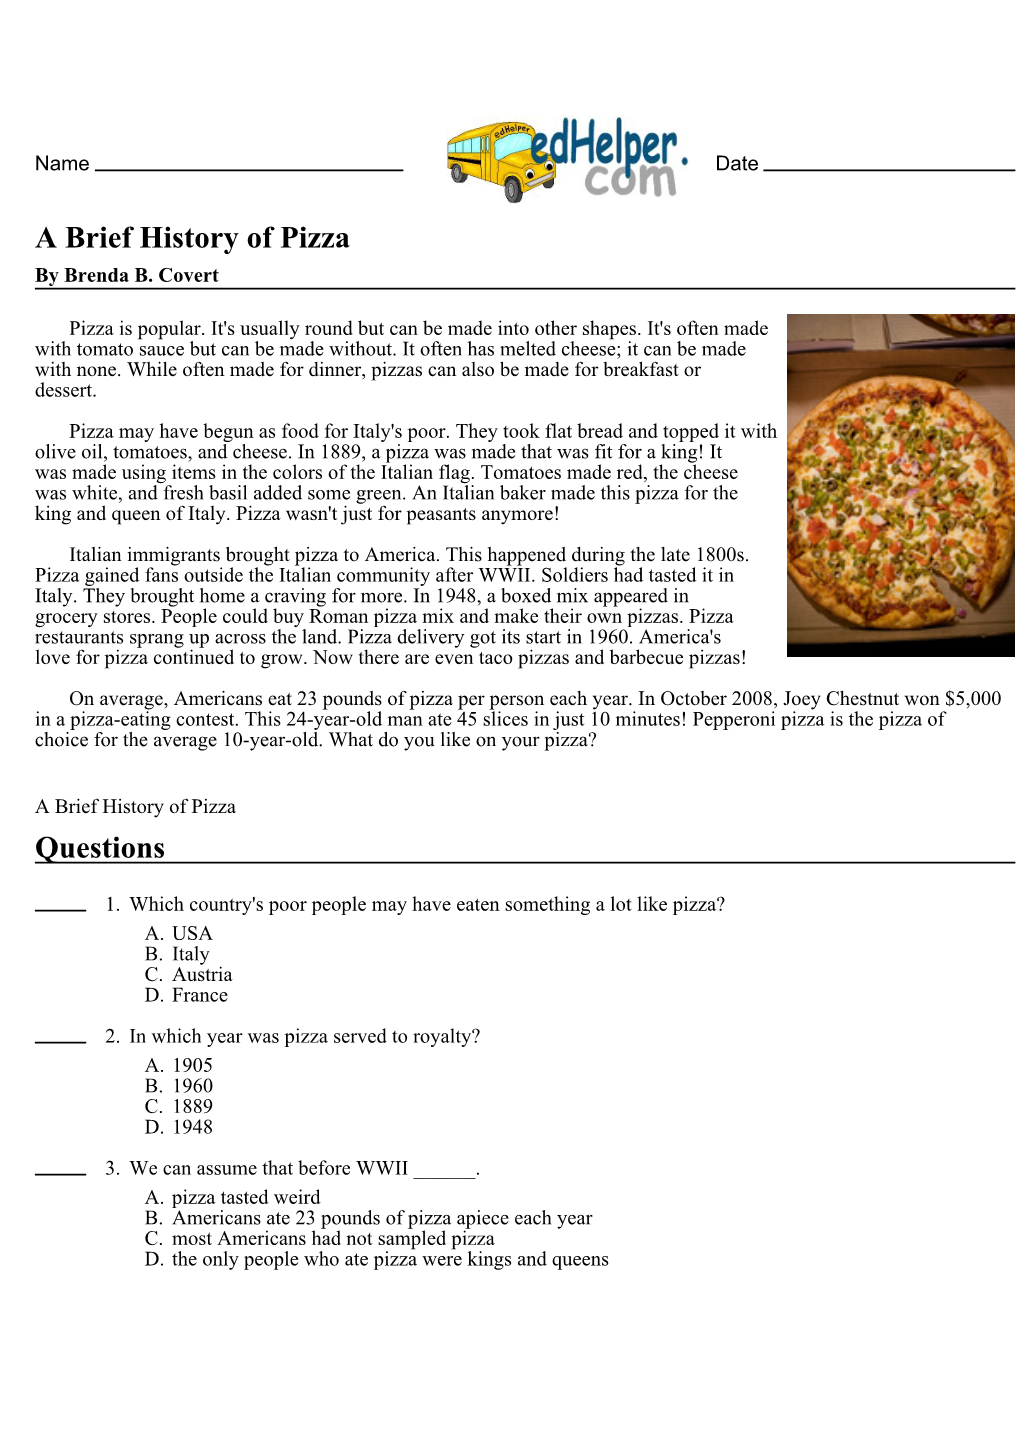 A Brief History of Pizza Questions